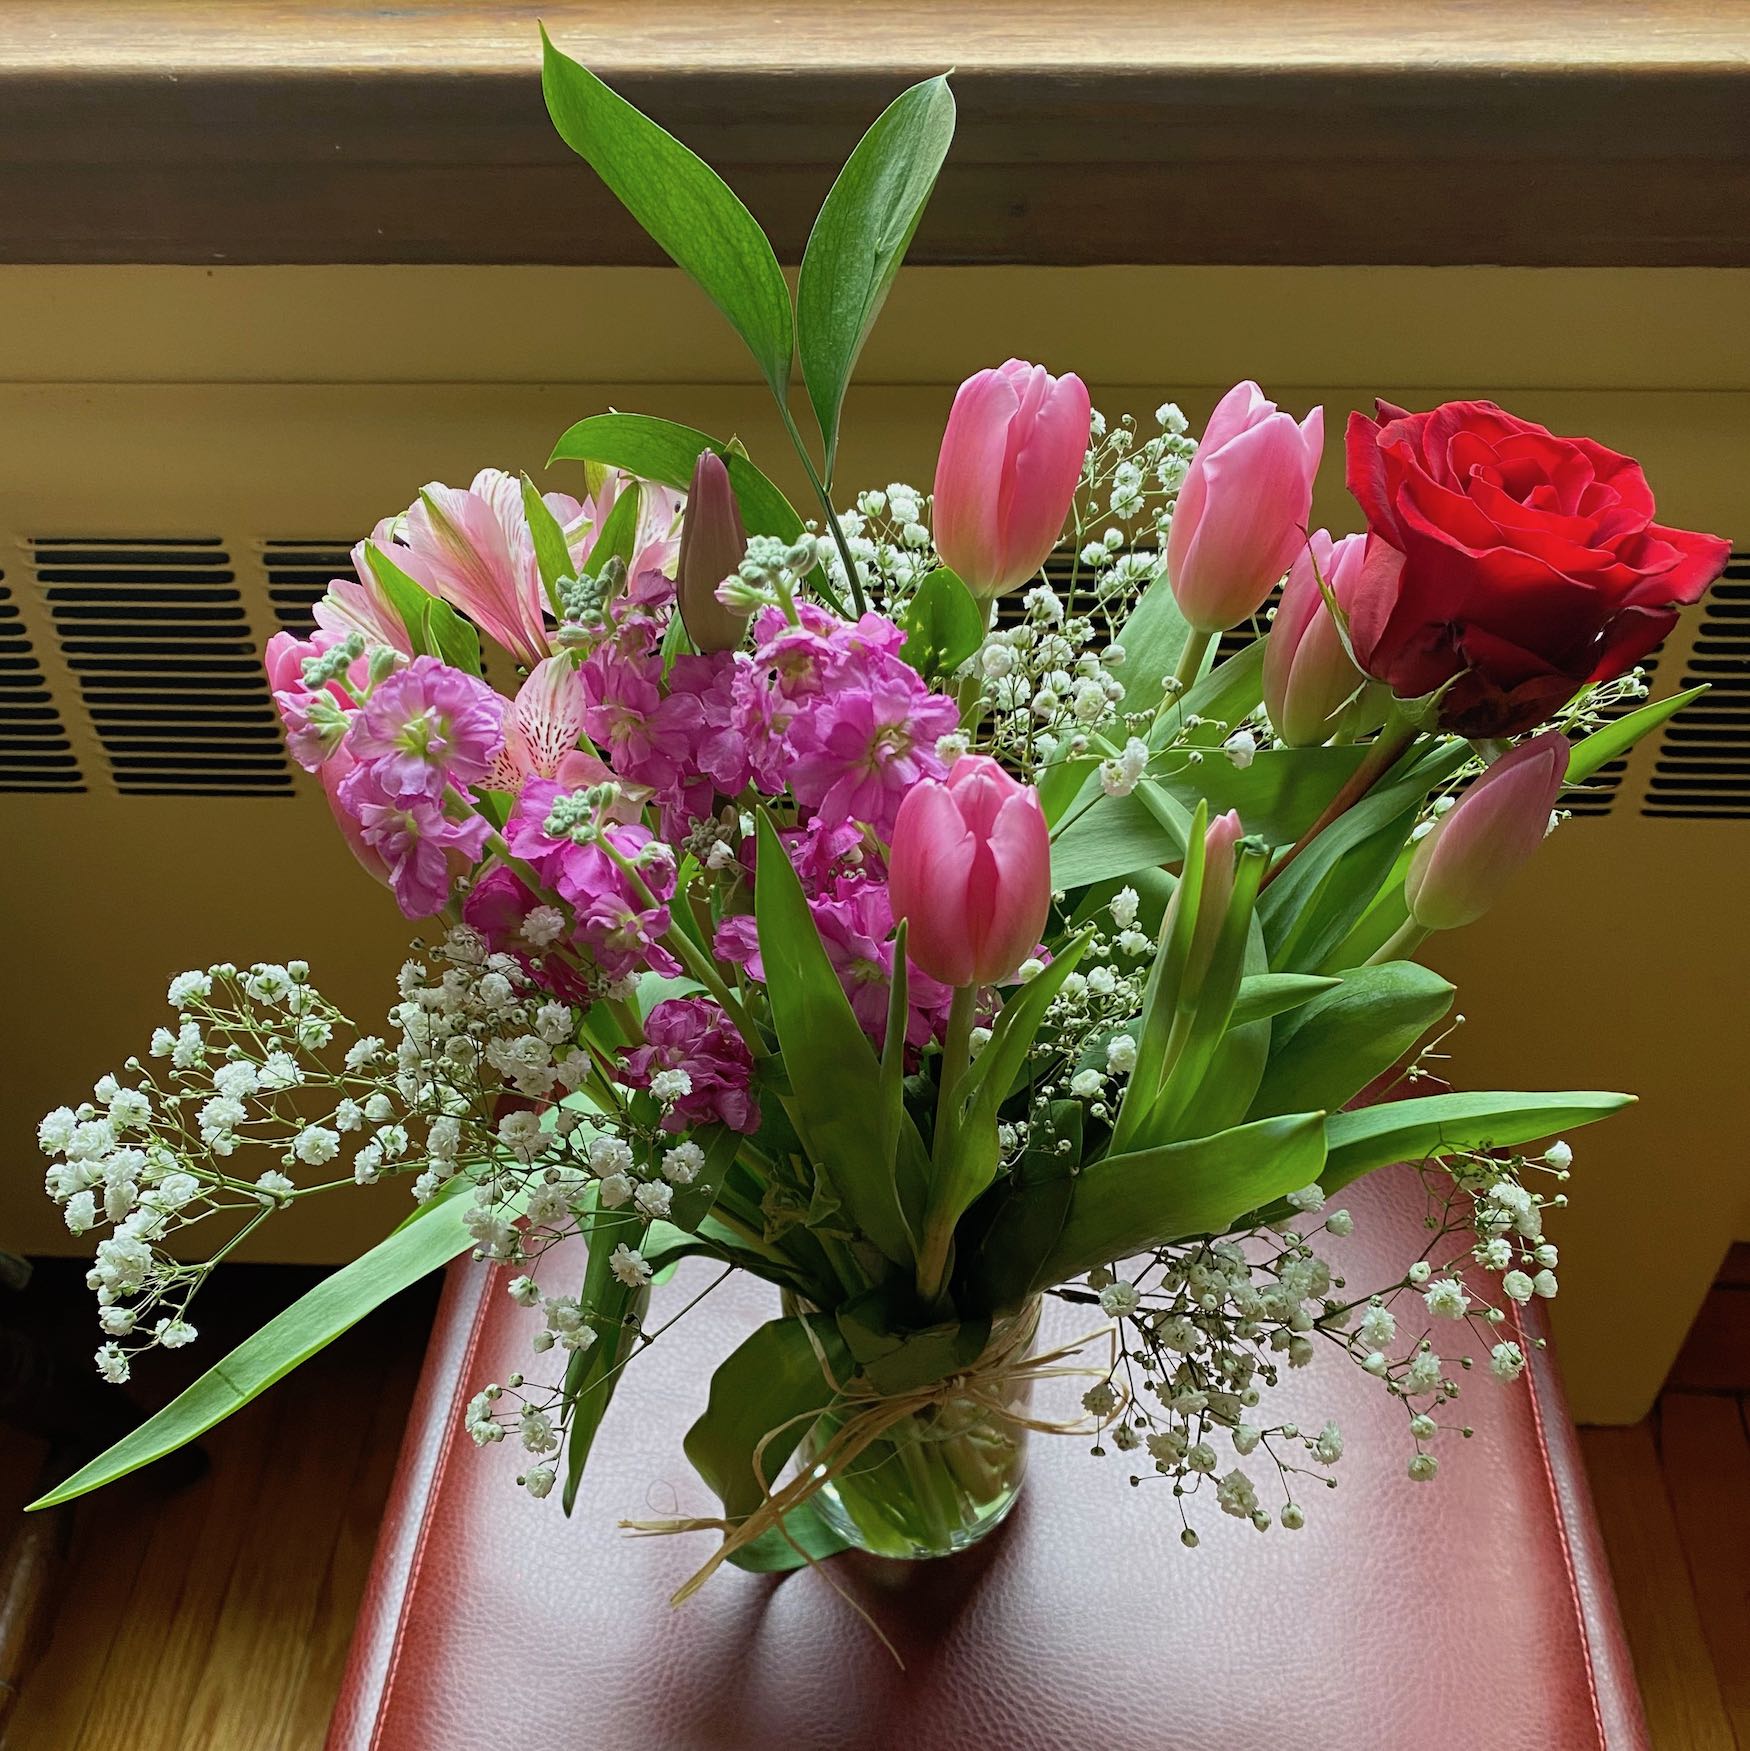 It's the Weekend! Number 286, A Bouquet of Pink Tulips and a Red Rose